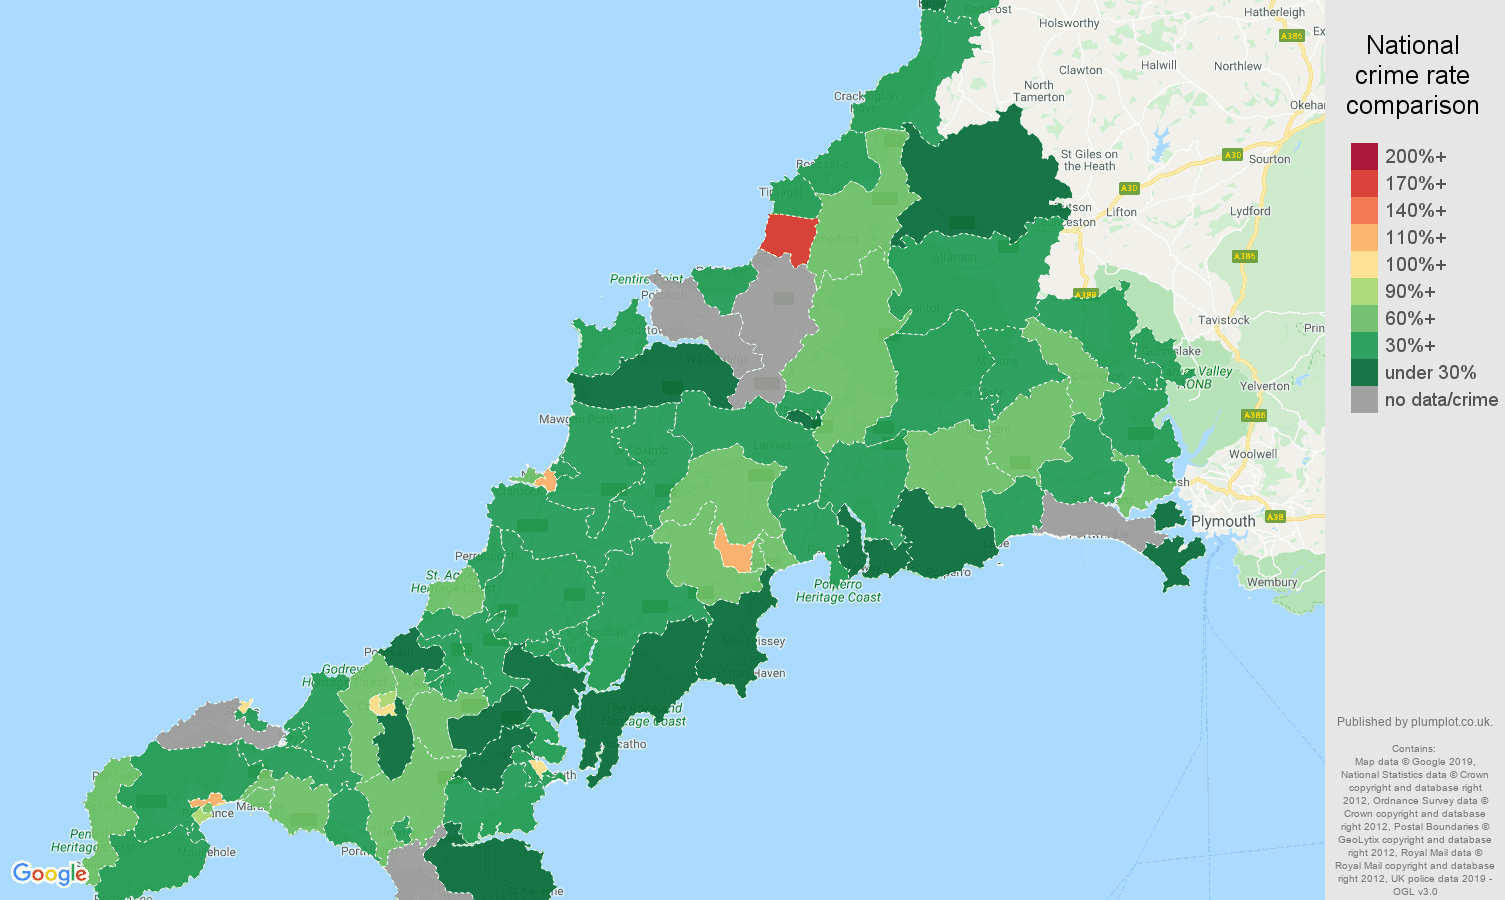 Cornwall other crime rate comparison map